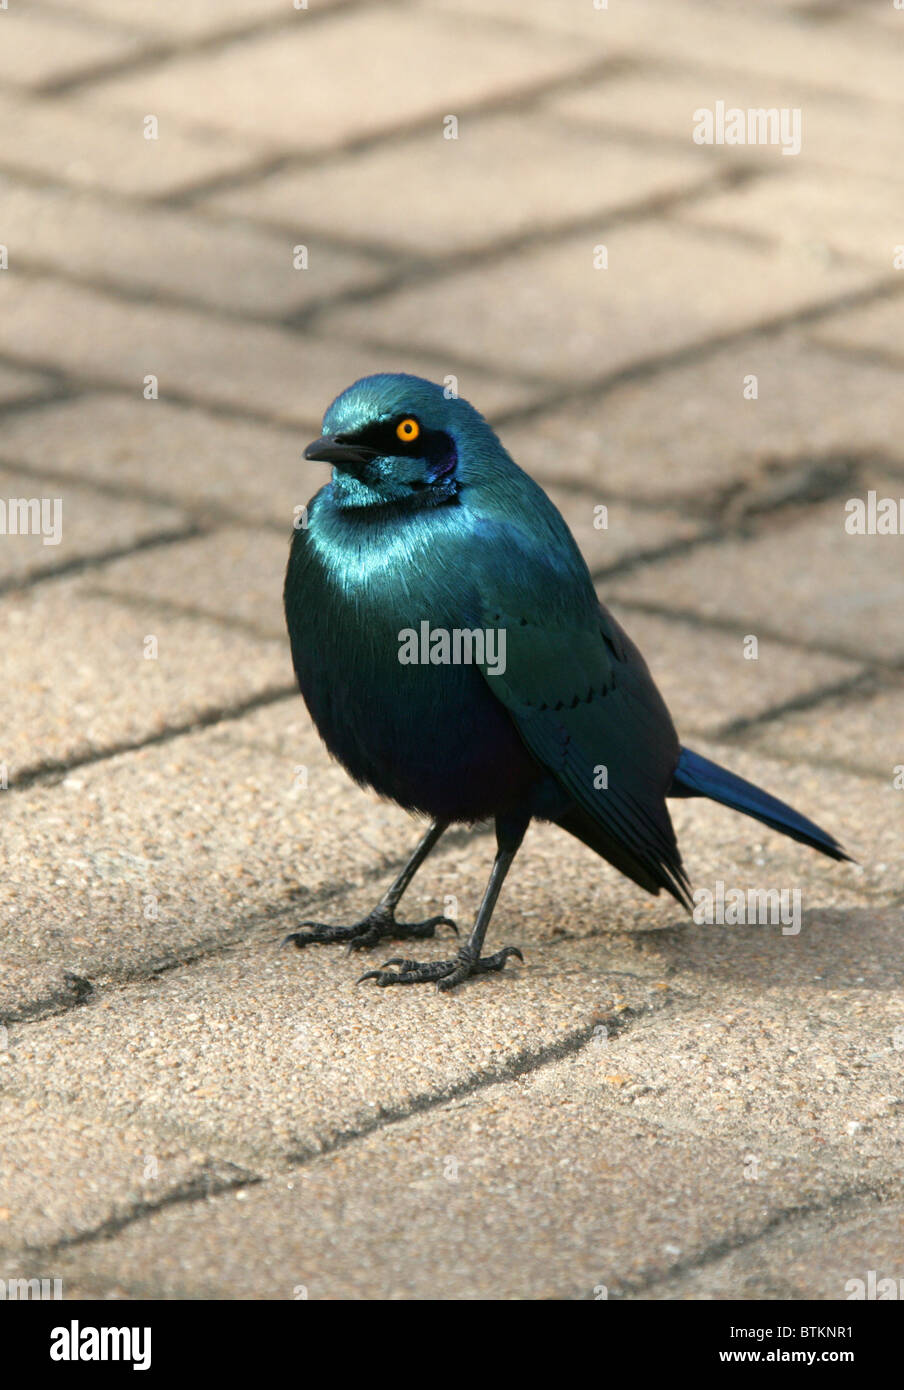 Cape Glossy Starling, Lamprotornis nitens, Sturnidae, South Africa Stock Photo